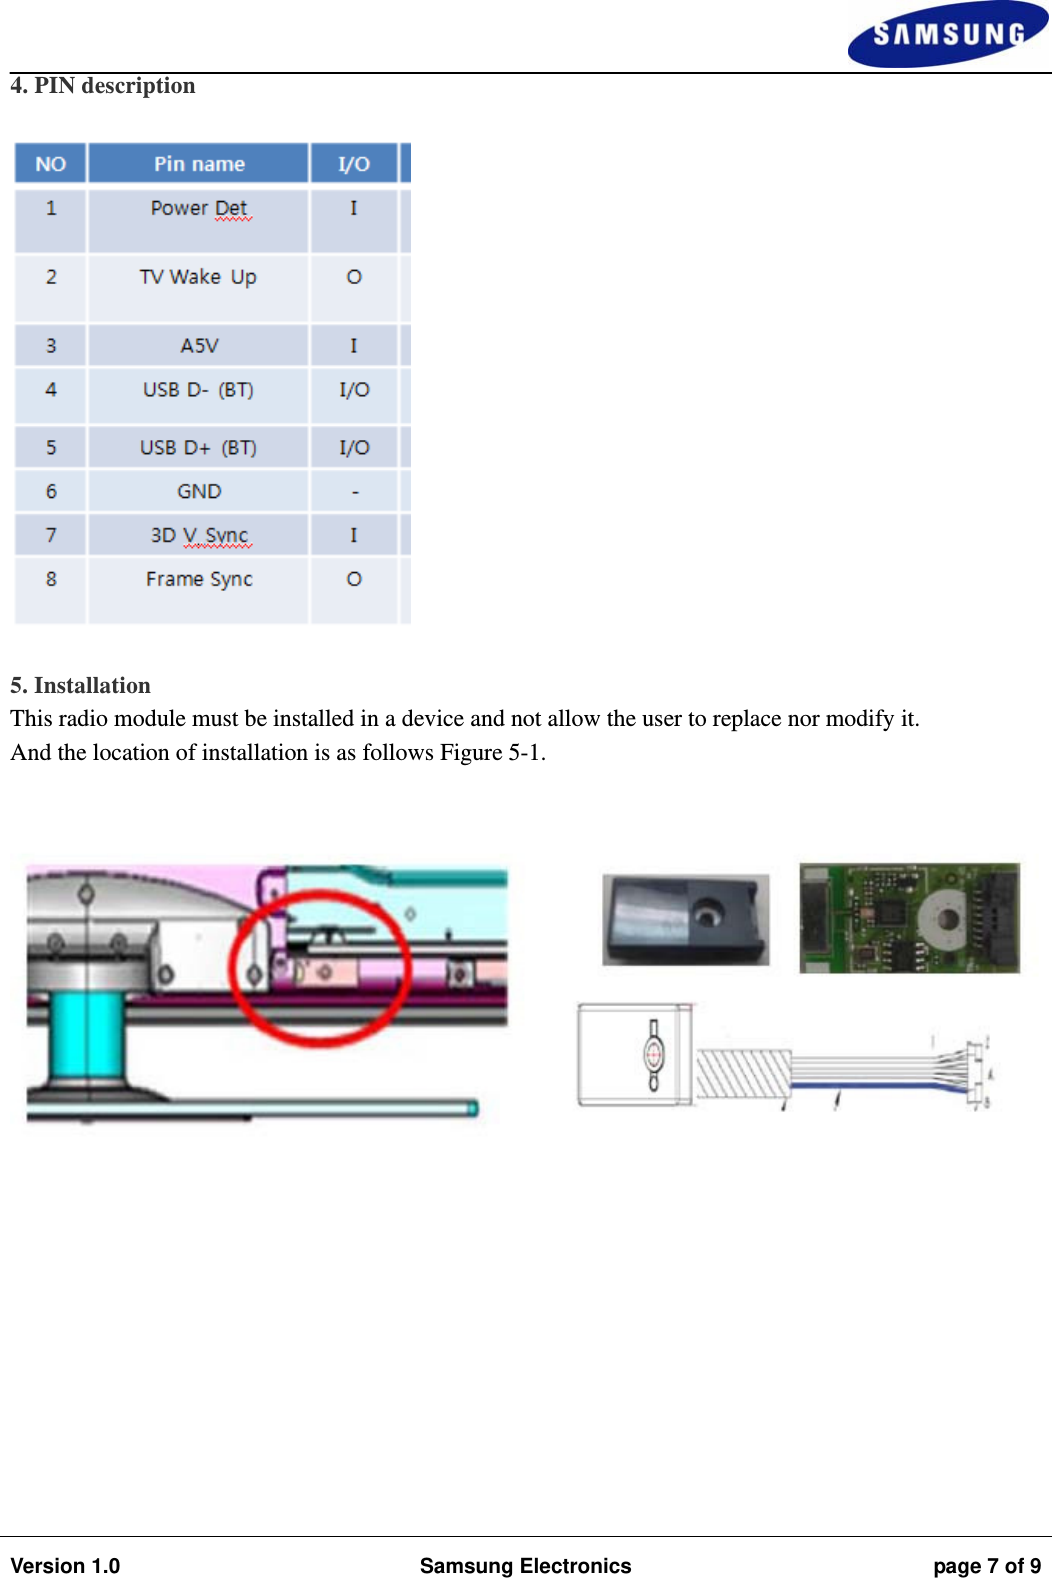                                                                                                                                                                    Version 1.0  Samsung Electronics  page 7 of 9  4. PIN description    5. Installation This radio module must be installed in a device and not allow the user to replace nor modify it. And the location of installation is as follows Figure 5-1.   